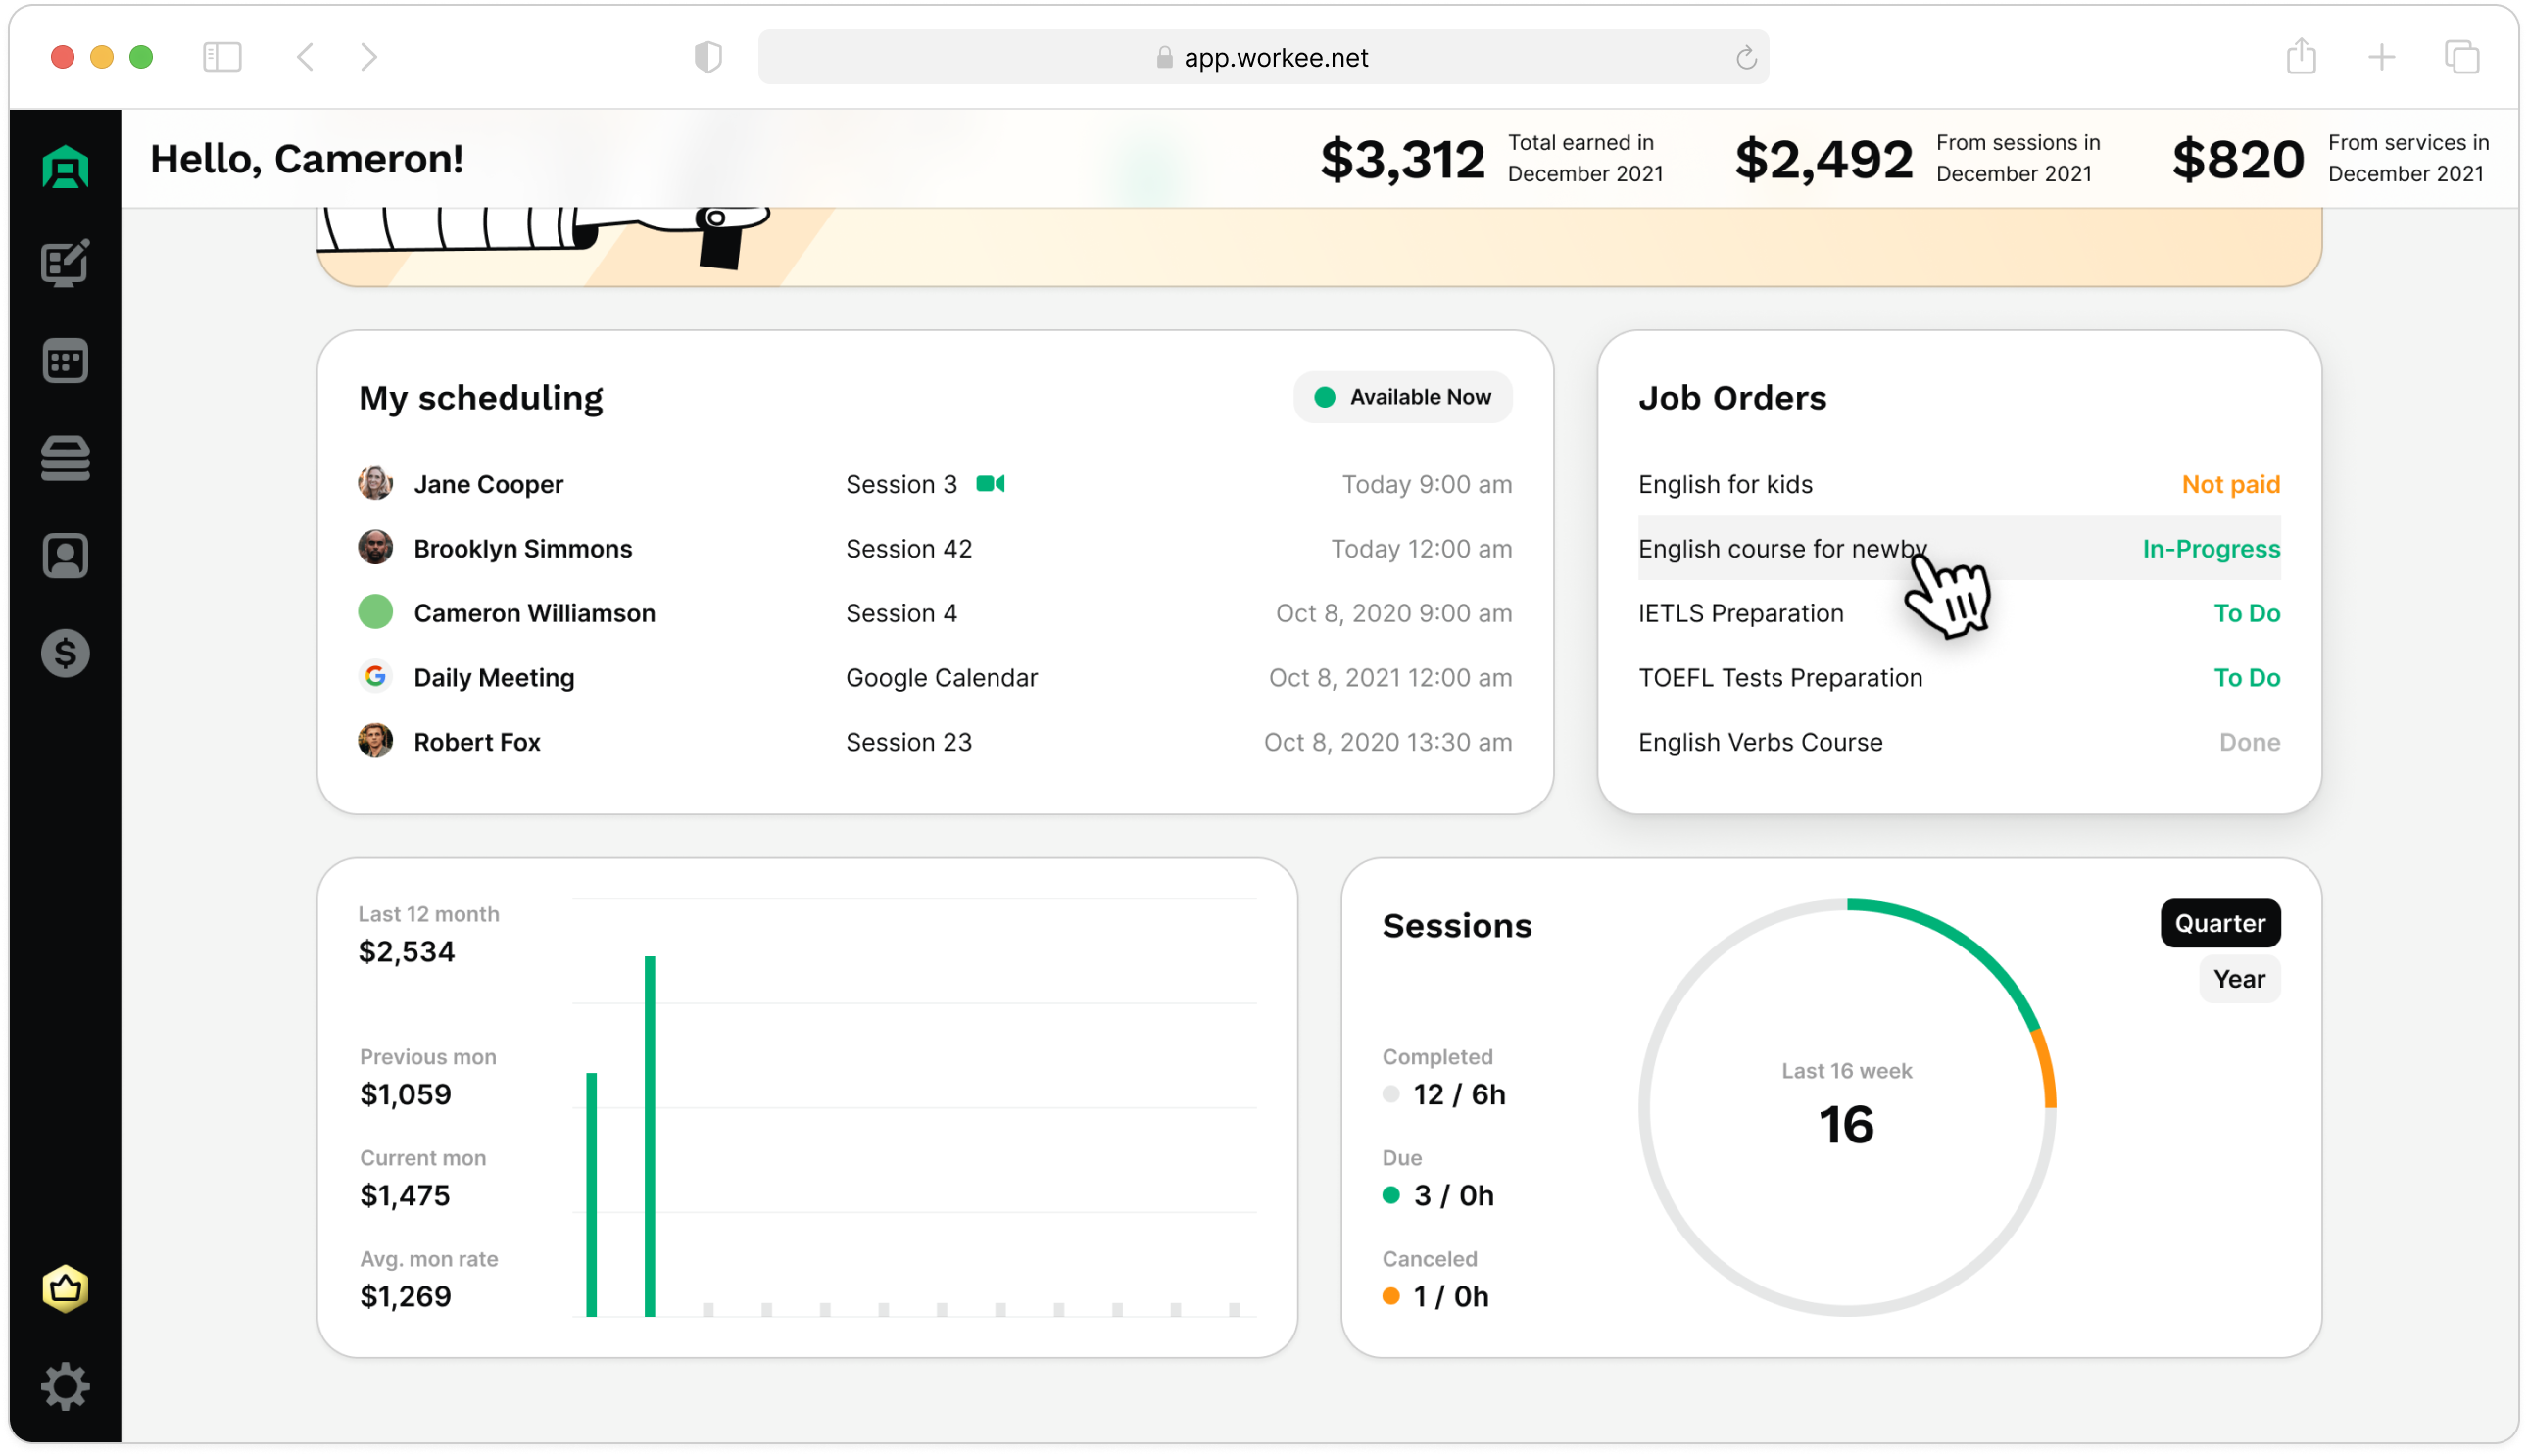 Stay on top of your progress and business statistics with an improved dashboard. Easily track and analyze all your data in one place, giving you valuable insights at a glance.